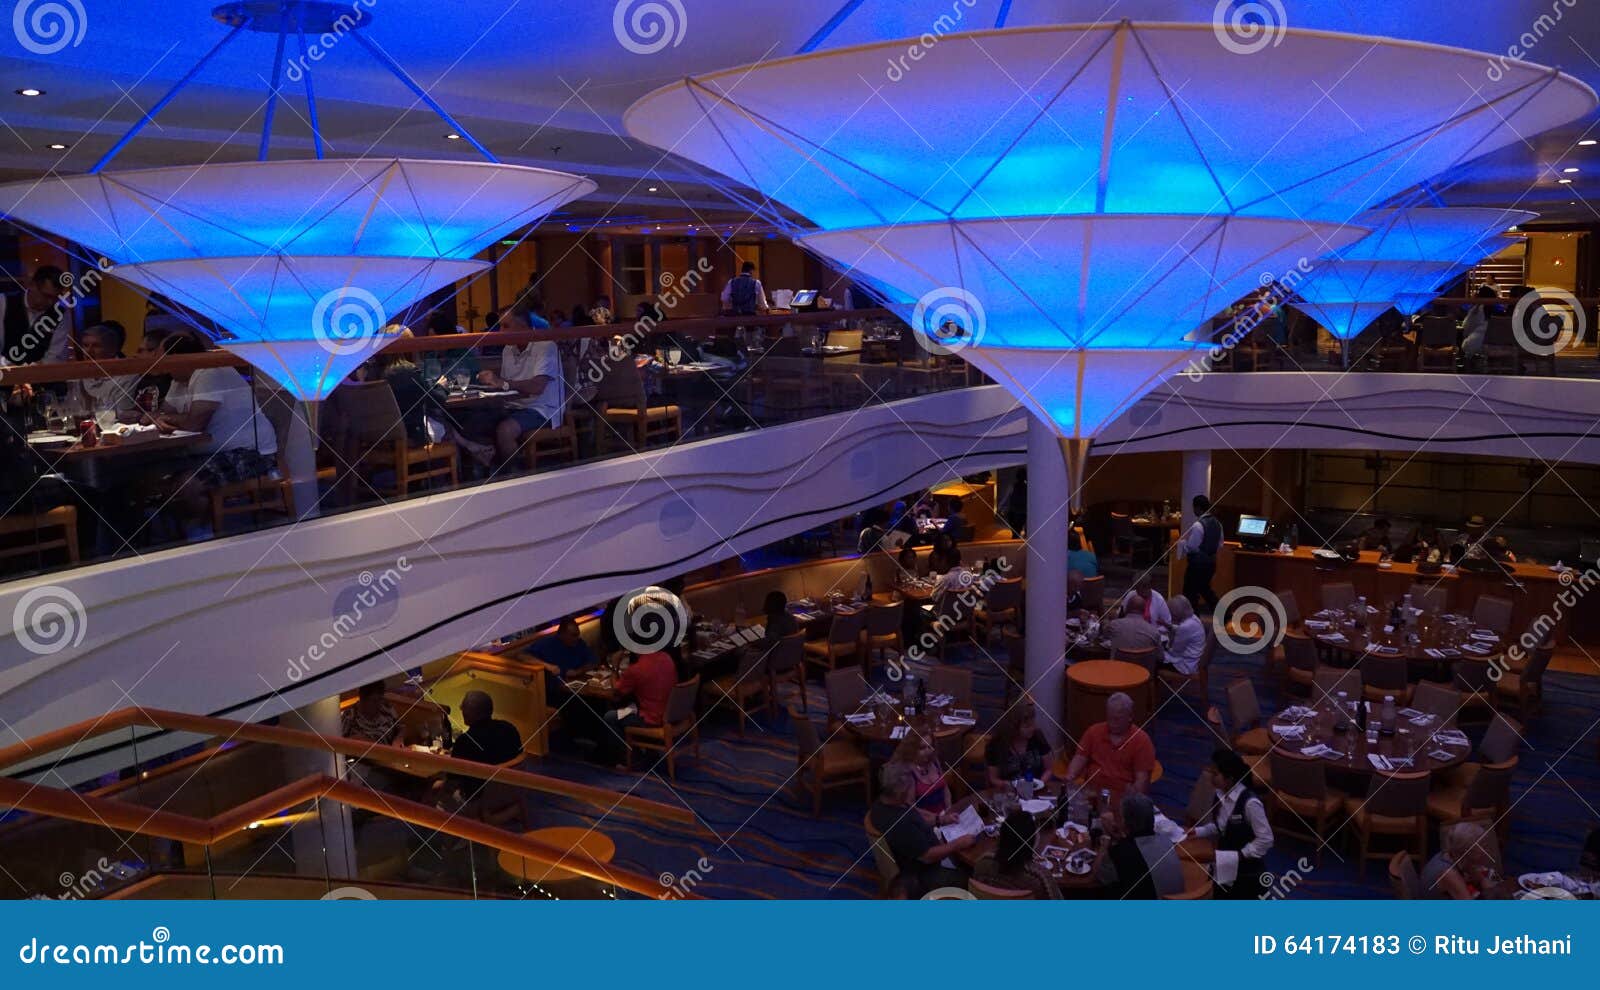 Carnival Breeze Cruise Ship Editorial Stock Photo Image Of